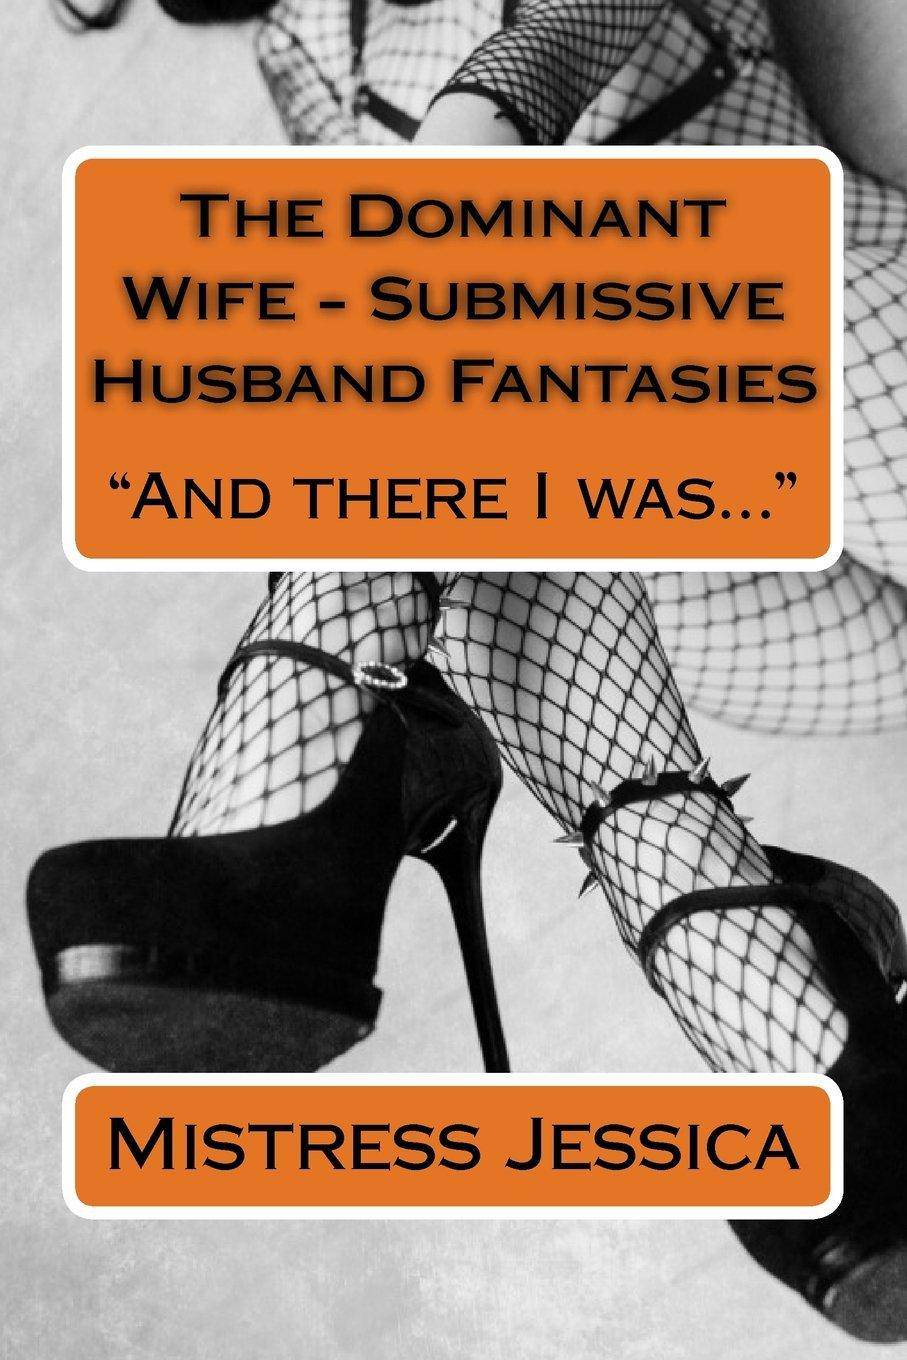 The Dominant Wife - Submissive Husband Fantasies: And there I was... - SureShot Books Publishing LLC